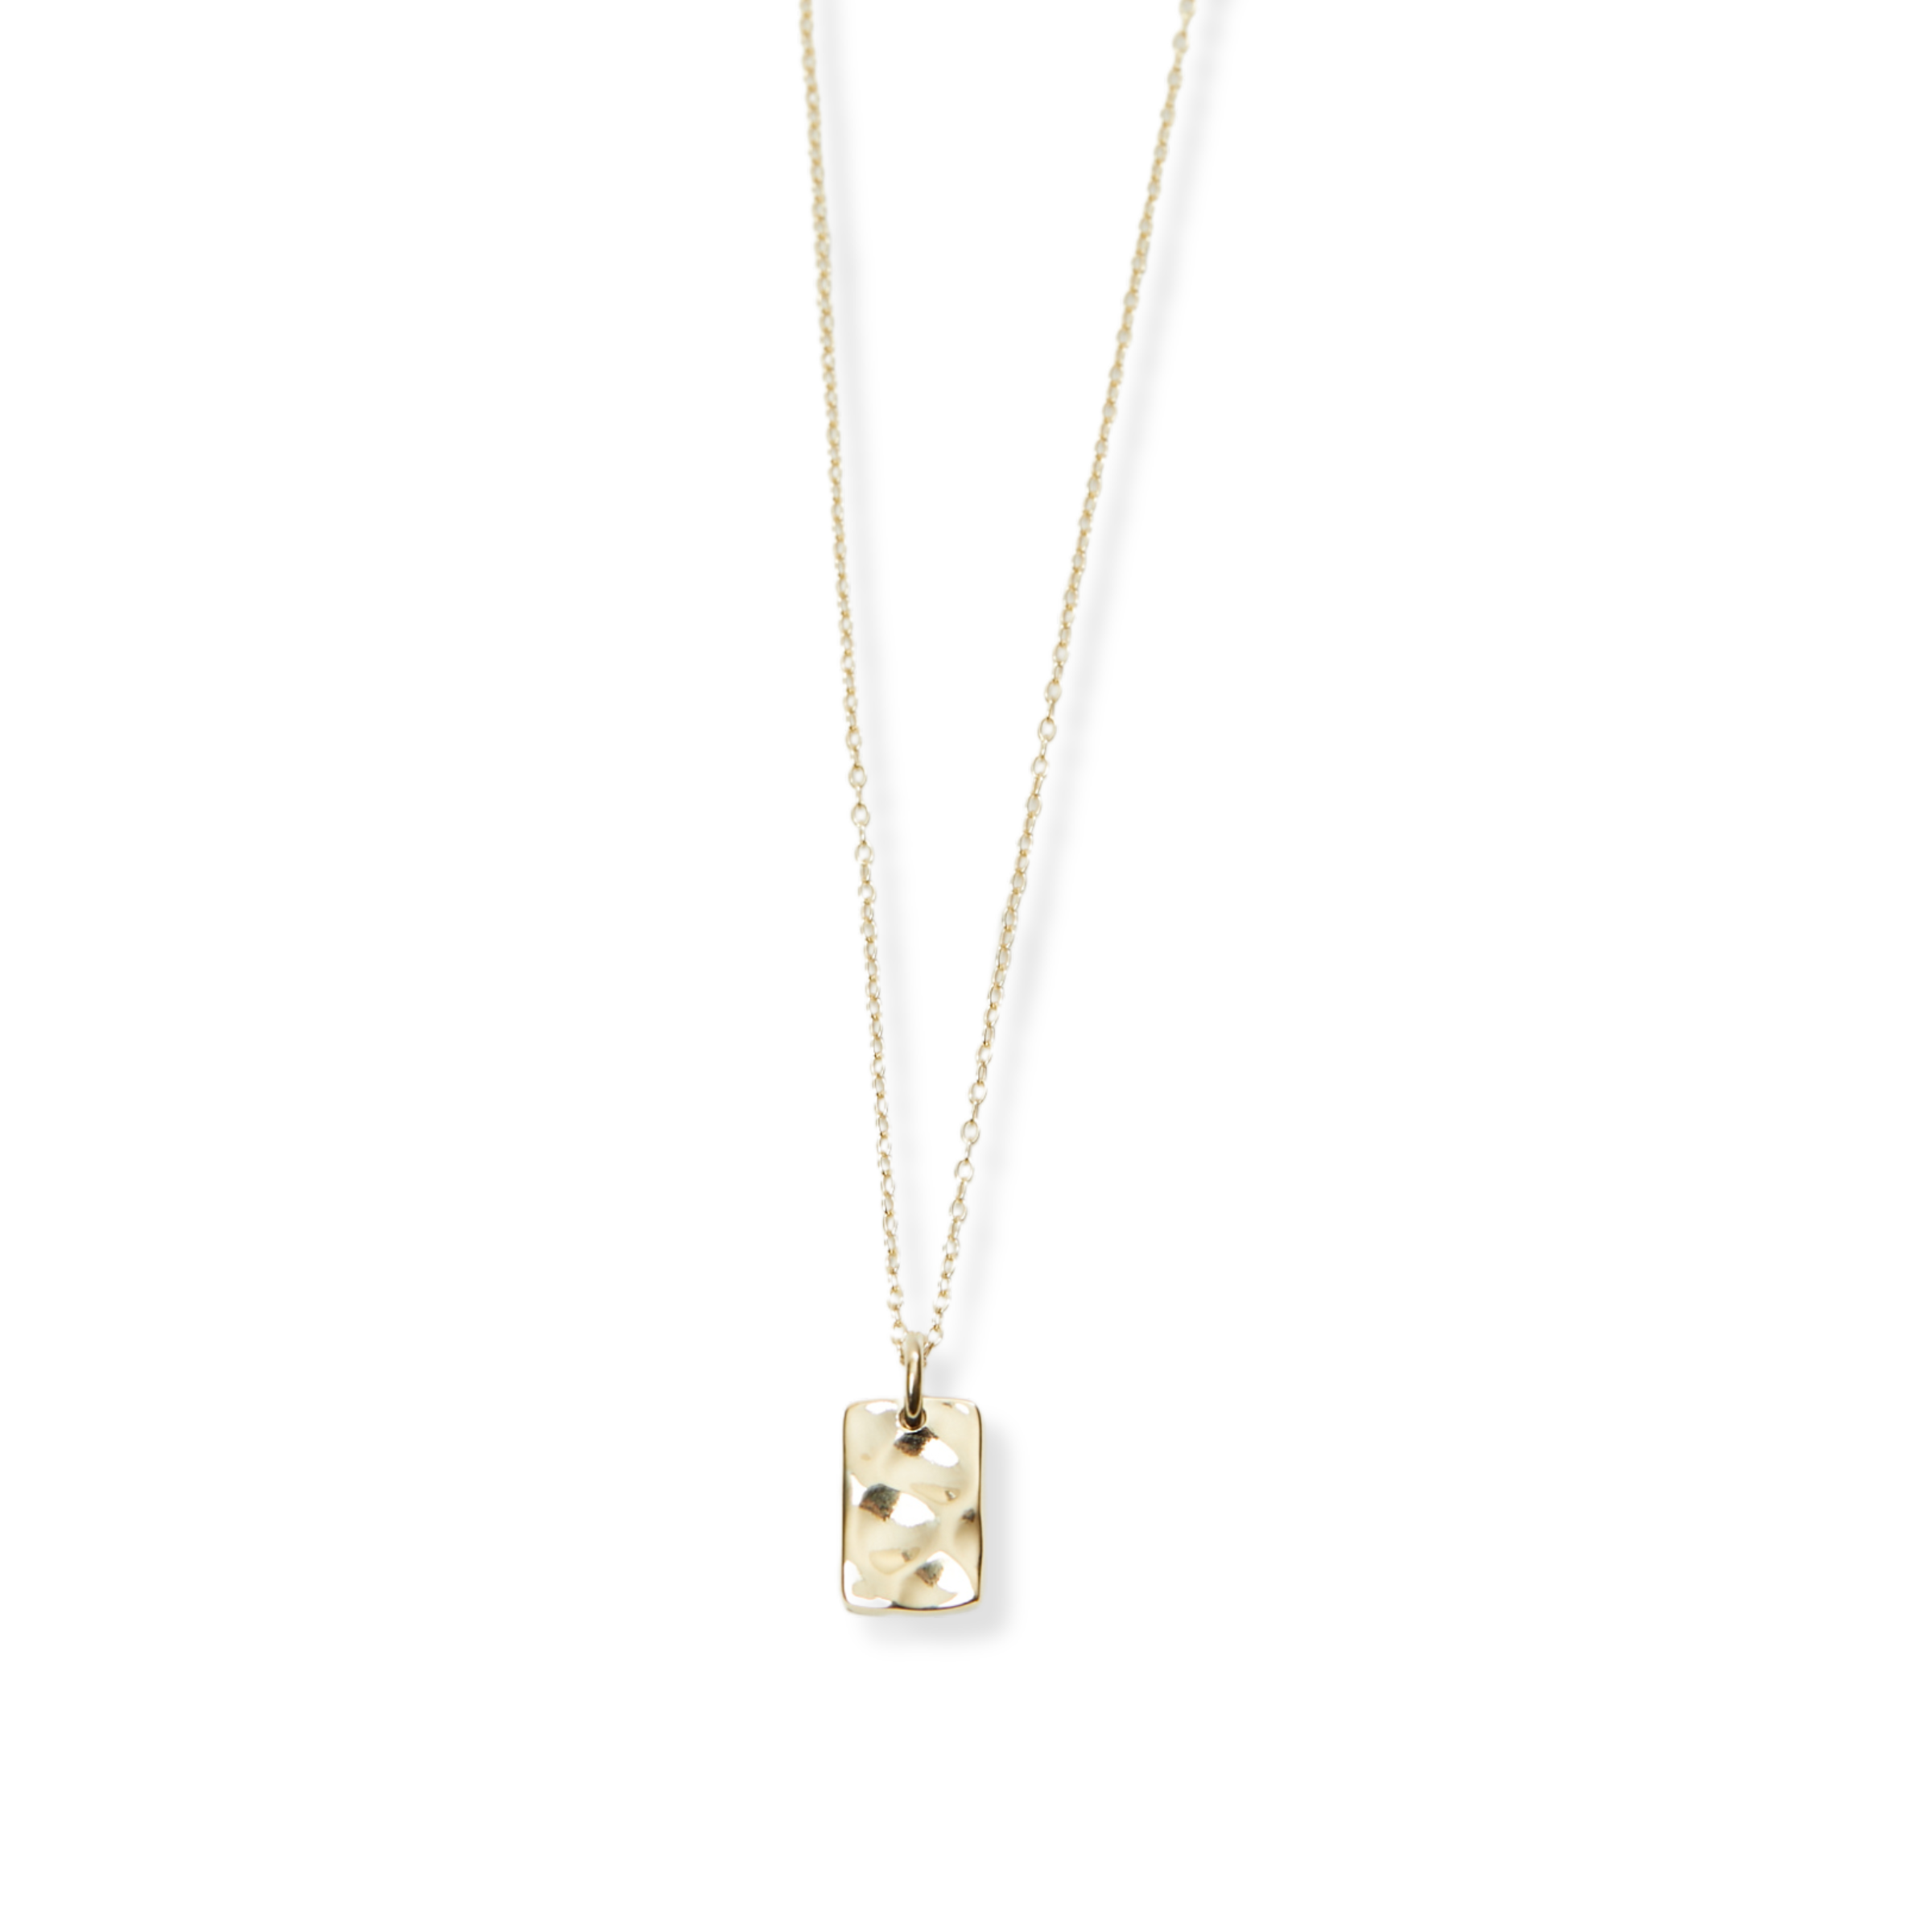 THE HAMMERED RECTANGLE PENDAT NECKLACE